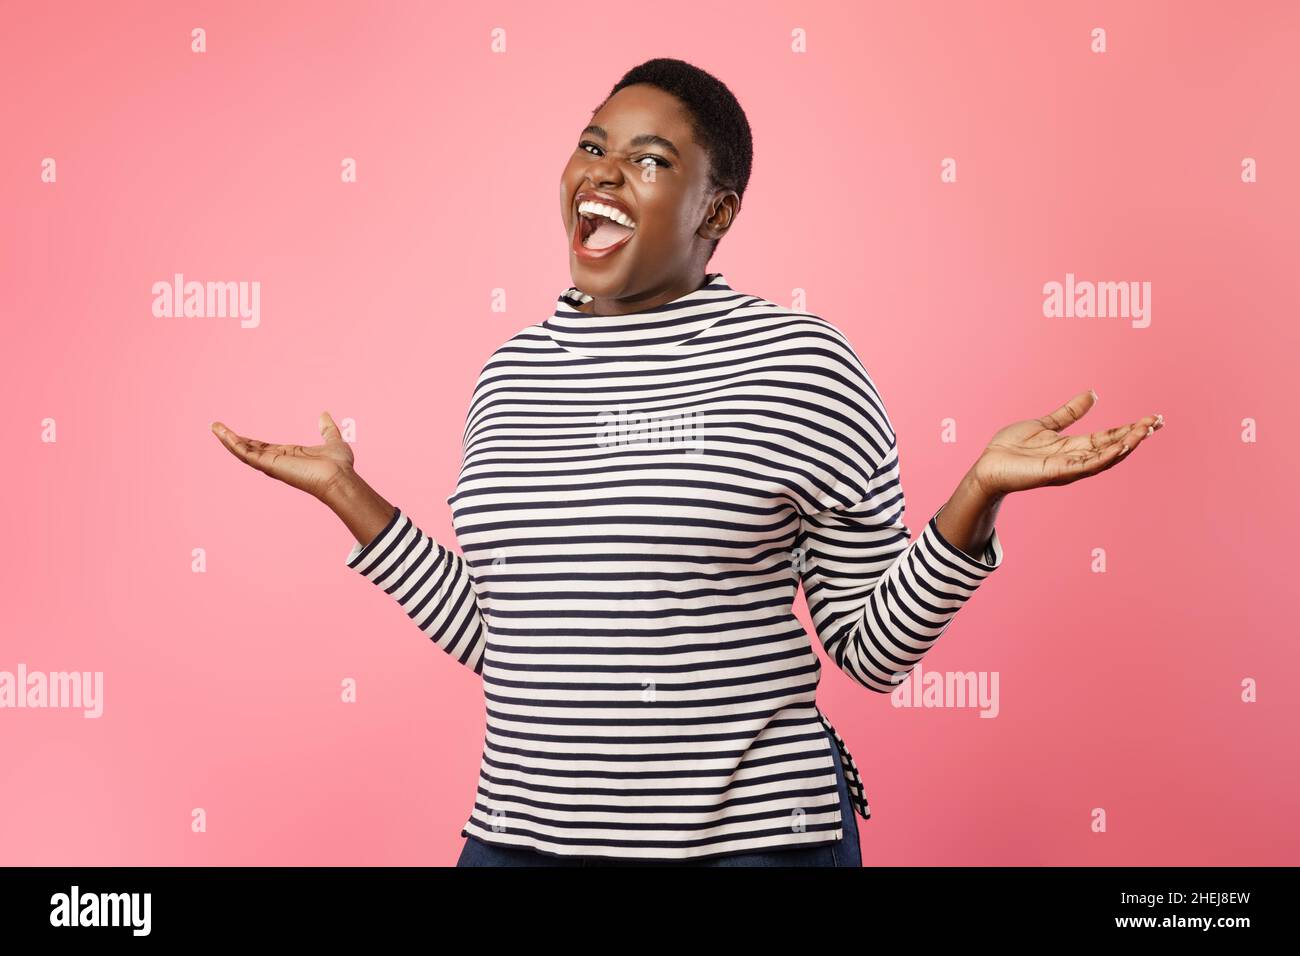 Overweight Black Lady Laughing And Shrugging Shoulders Over Pink Background Stock Photo